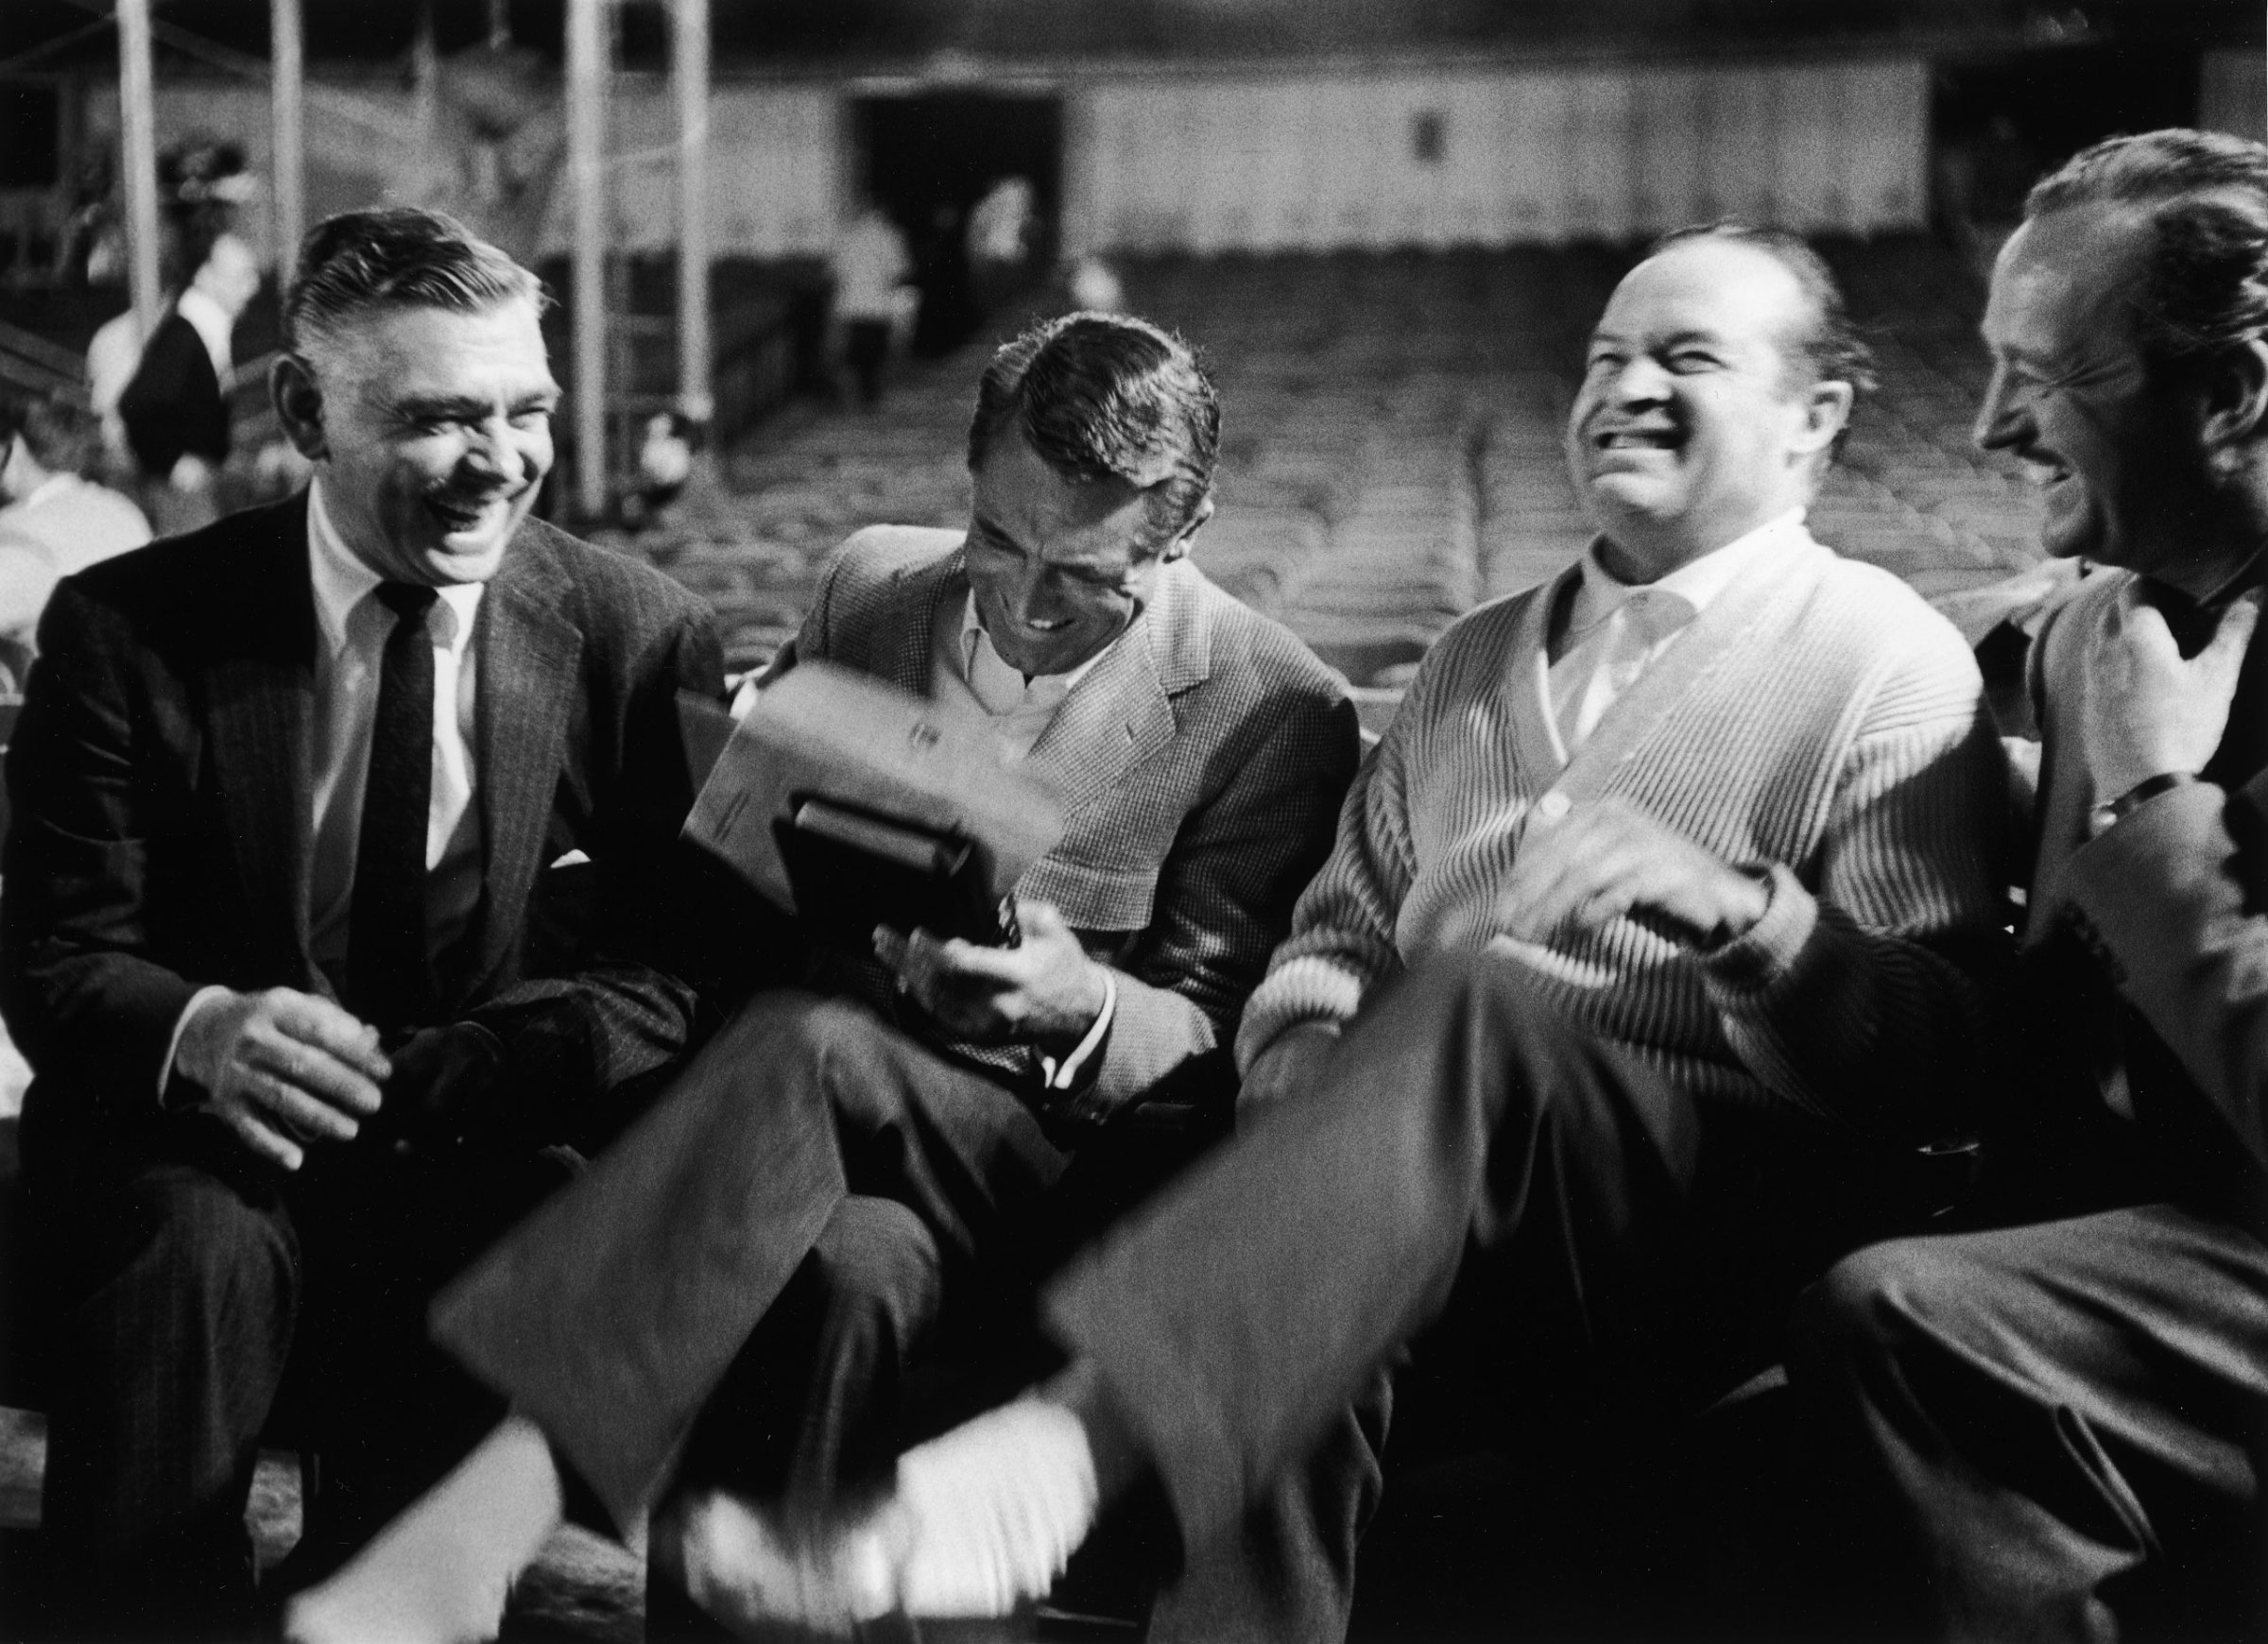 Clark Gable, Cary Grant, Bob Hope and David Niven laugh heartily together during a break from rehearsals for the 30th annual Academy Awards show in Los Angeles, 1958.